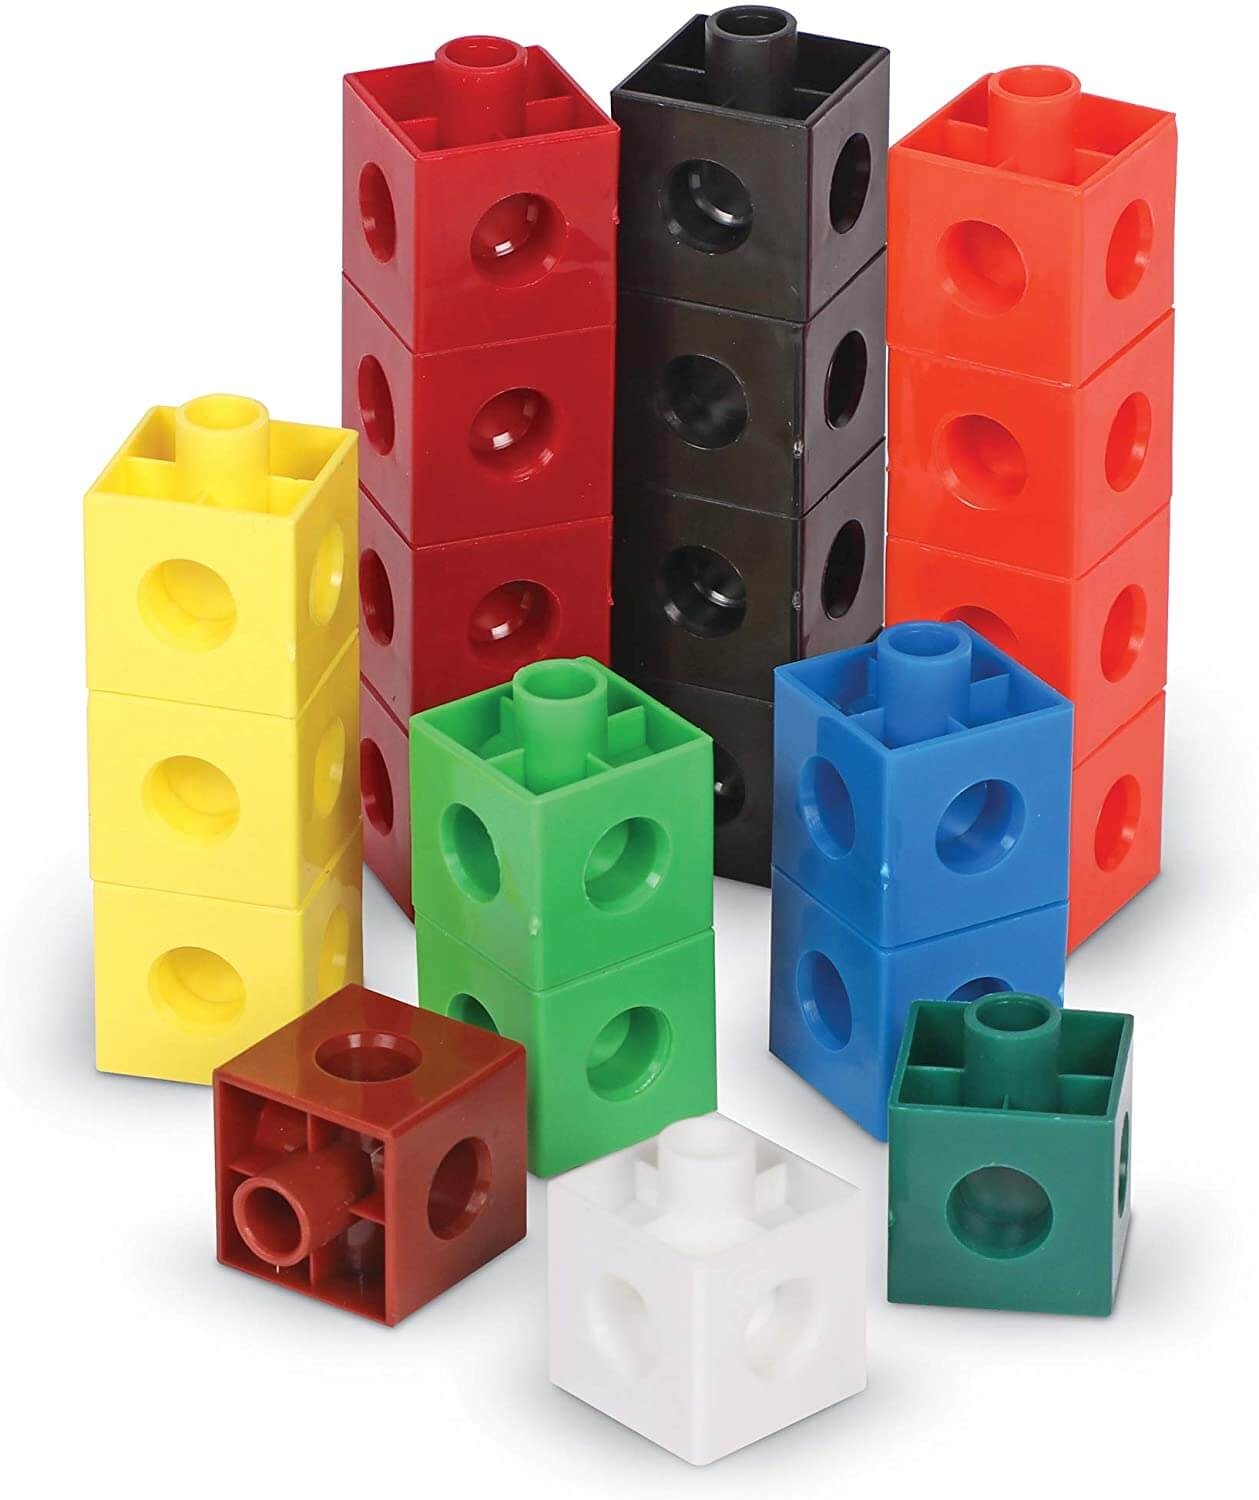 LR Maths Snap Cubes – Vocational/ Learning Toys For Children Aged 3-8 Years